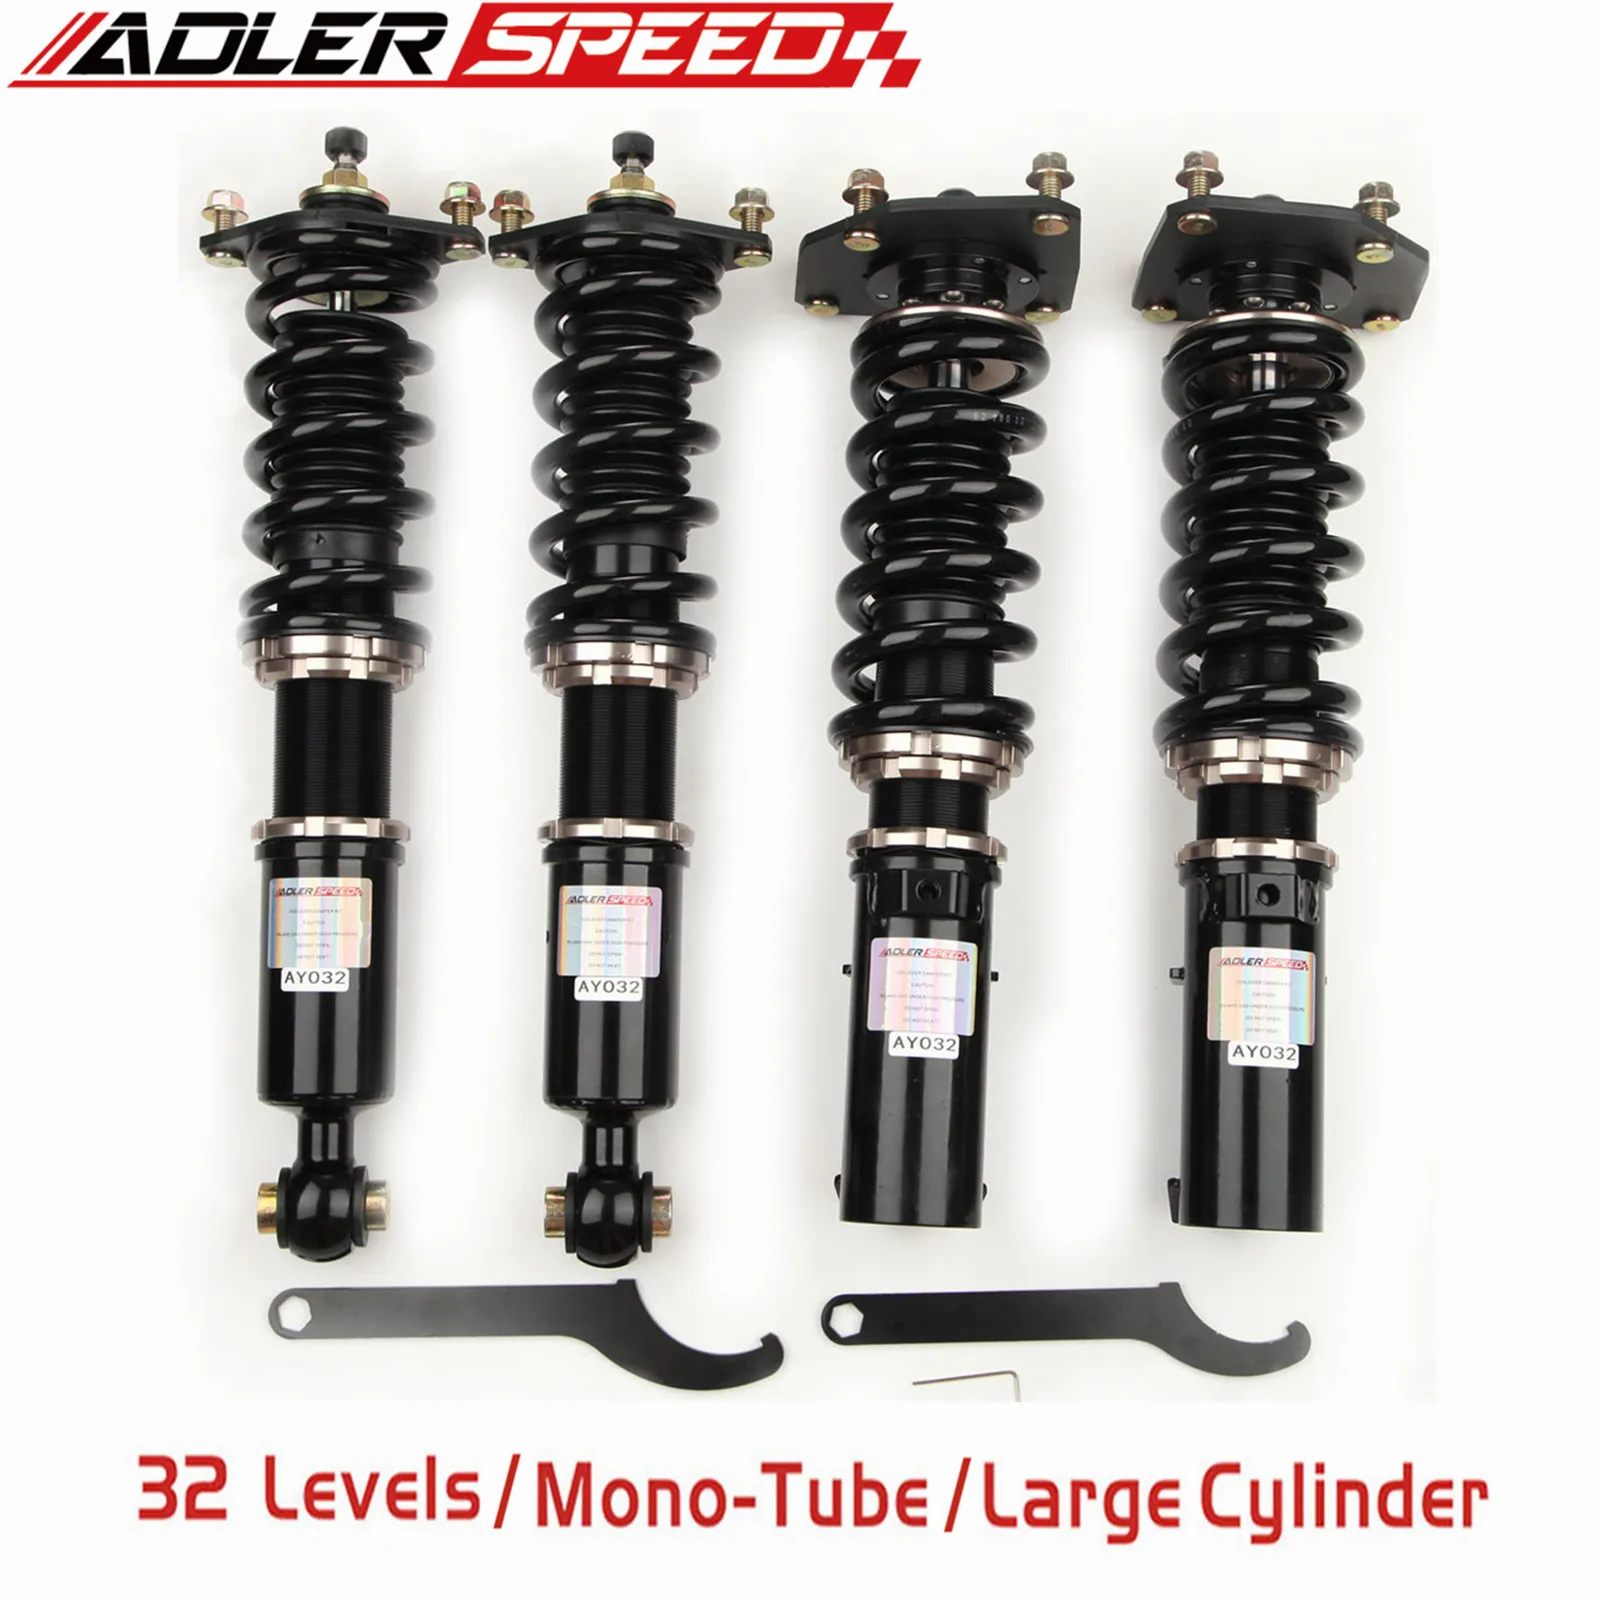 

ADLERSPEED 32 Way Damping Coilovers Suspension Kit For 1990-1994 ECLIPSE 1G EAGLE TALON FWD